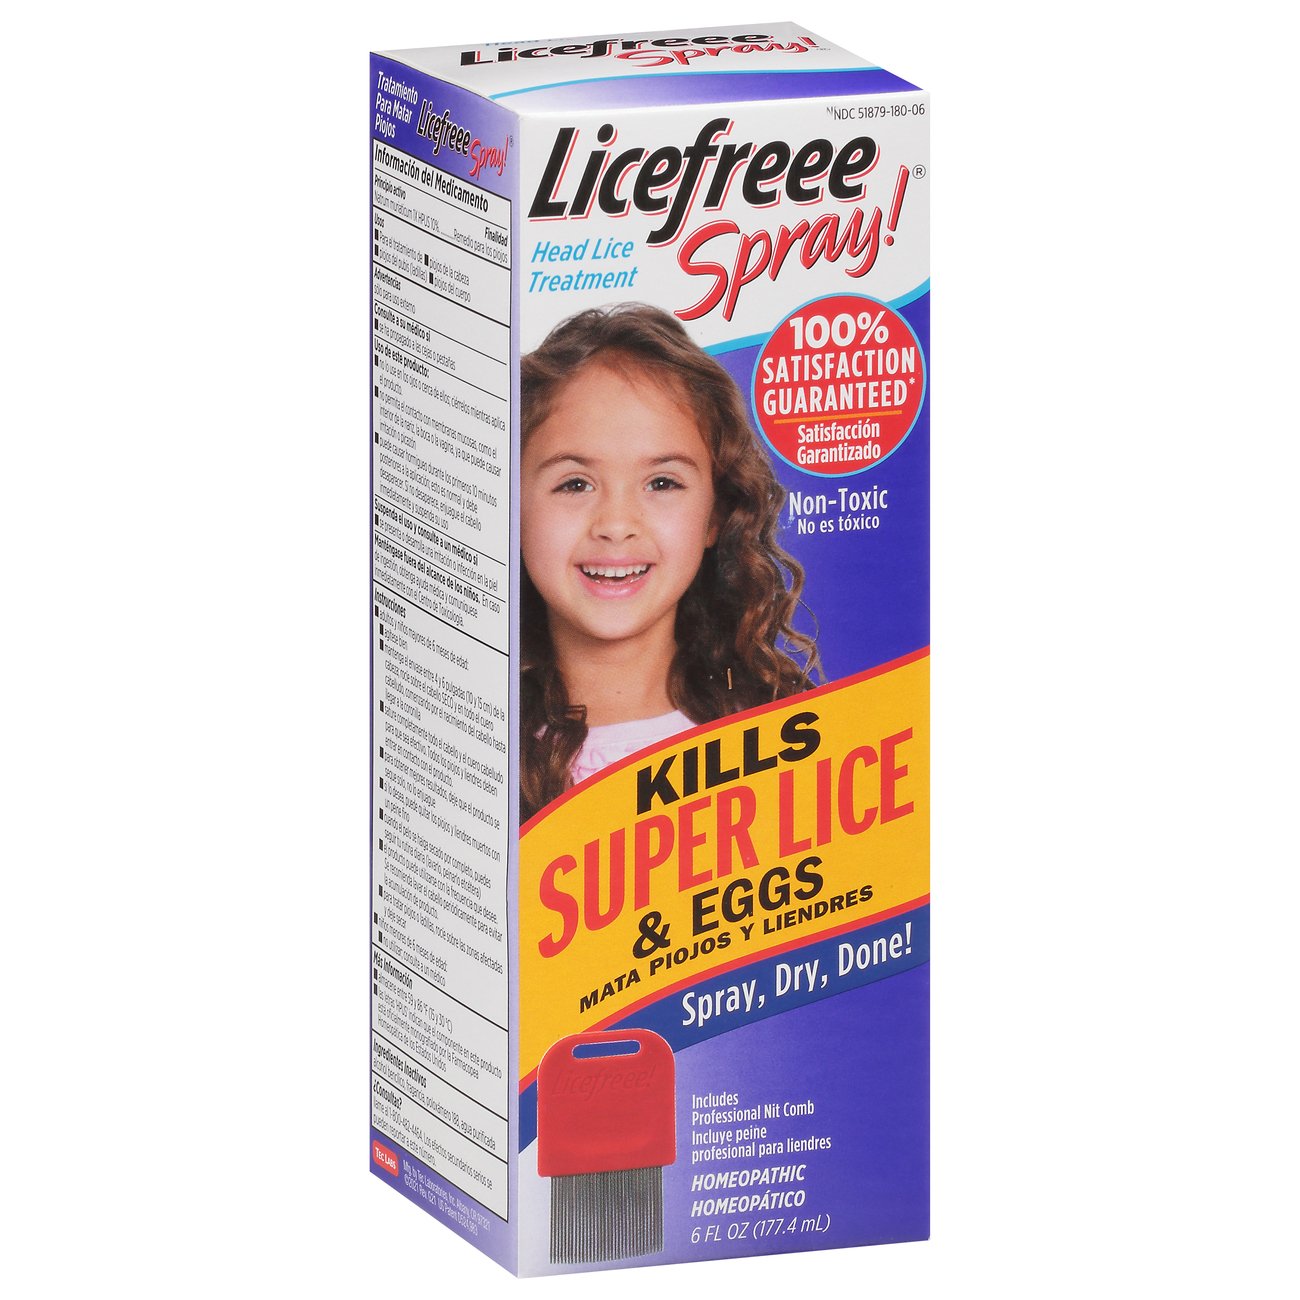 Licefreee Spray! Instant Head Lice Treatment - Shop Vitamins & Supplements  at H-E-B